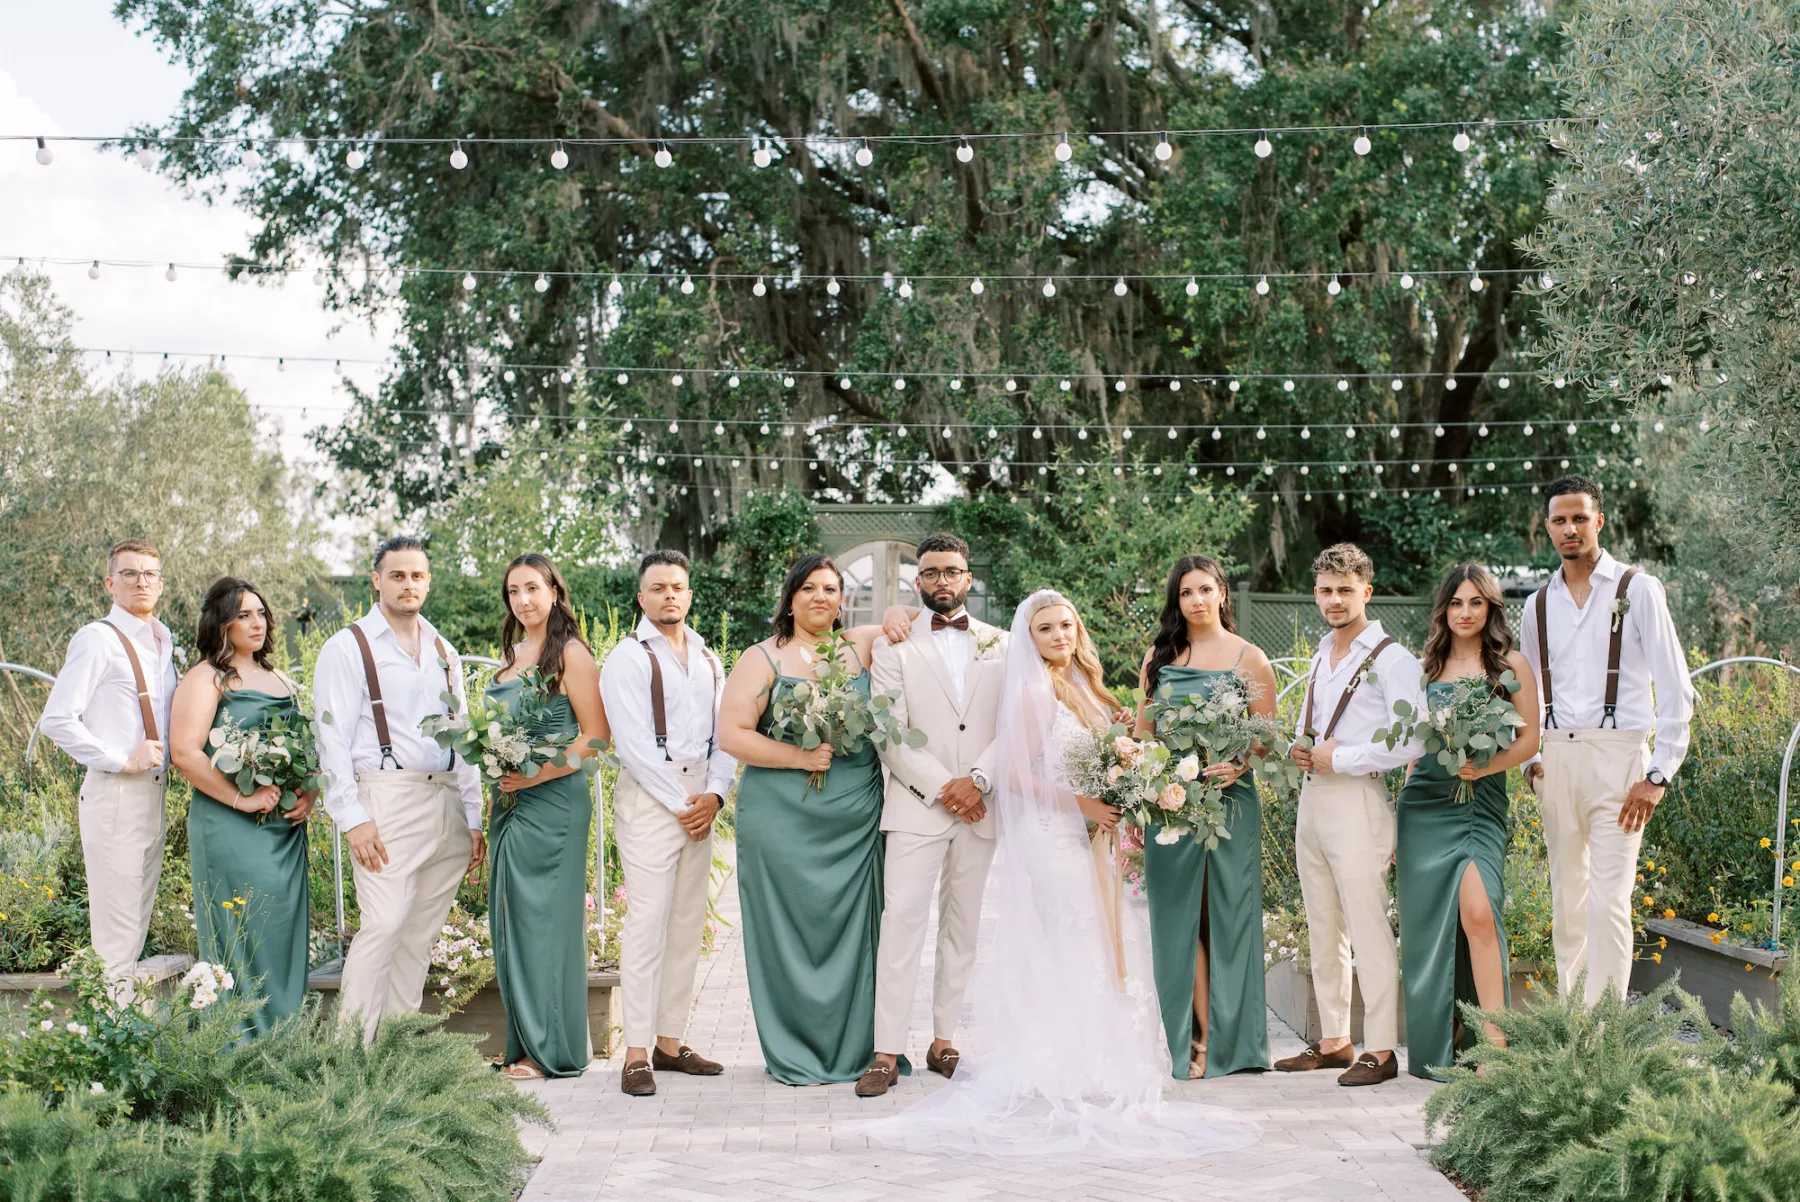 Matching Green Satin Bridesmaids Dresses | Tan Dress Pants With Suspenders Wedding Party Attire Inspiration